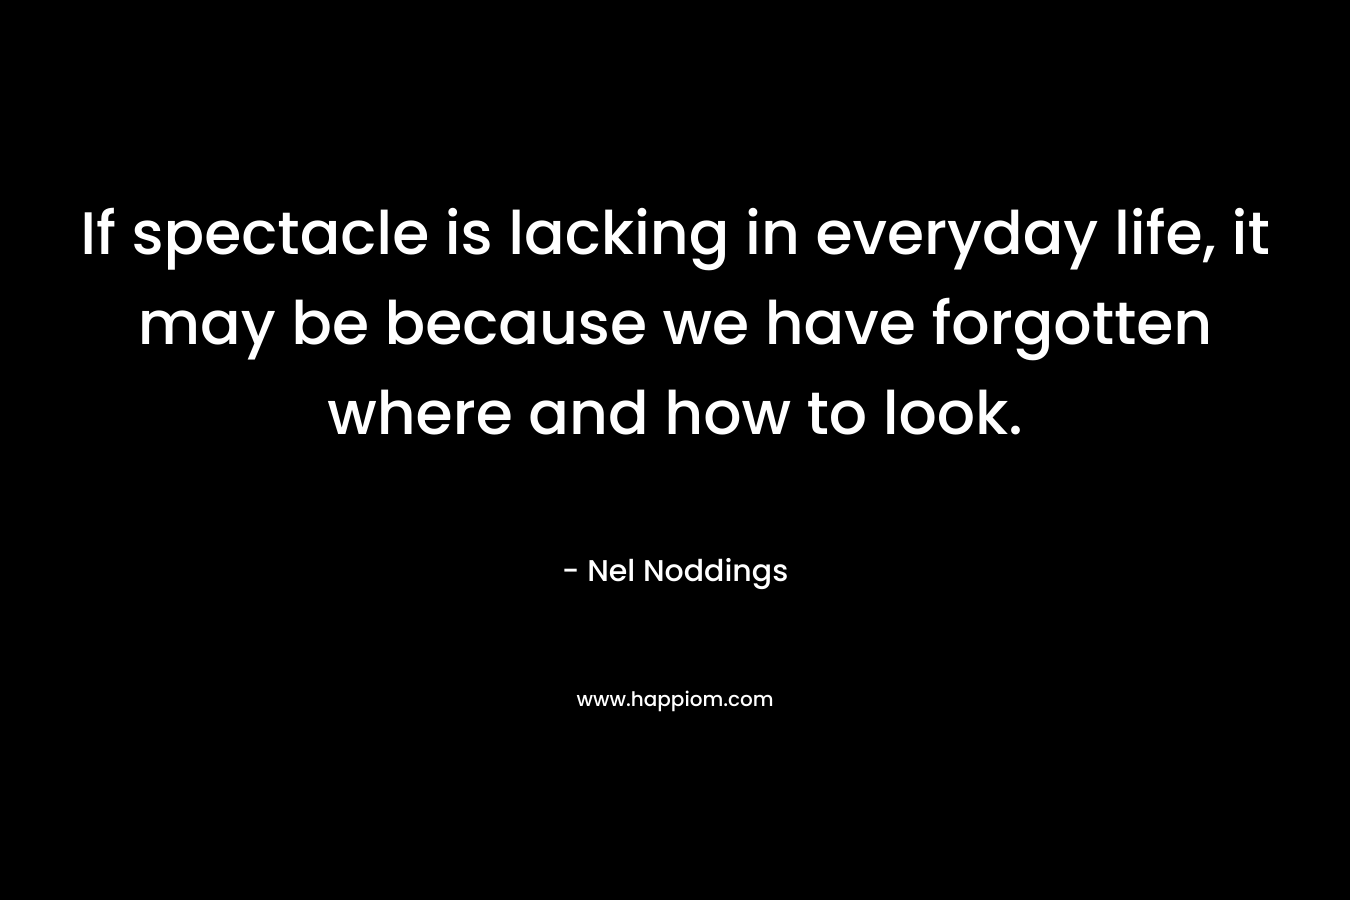 If spectacle is lacking in everyday life, it may be because we have forgotten where and how to look. – Nel Noddings